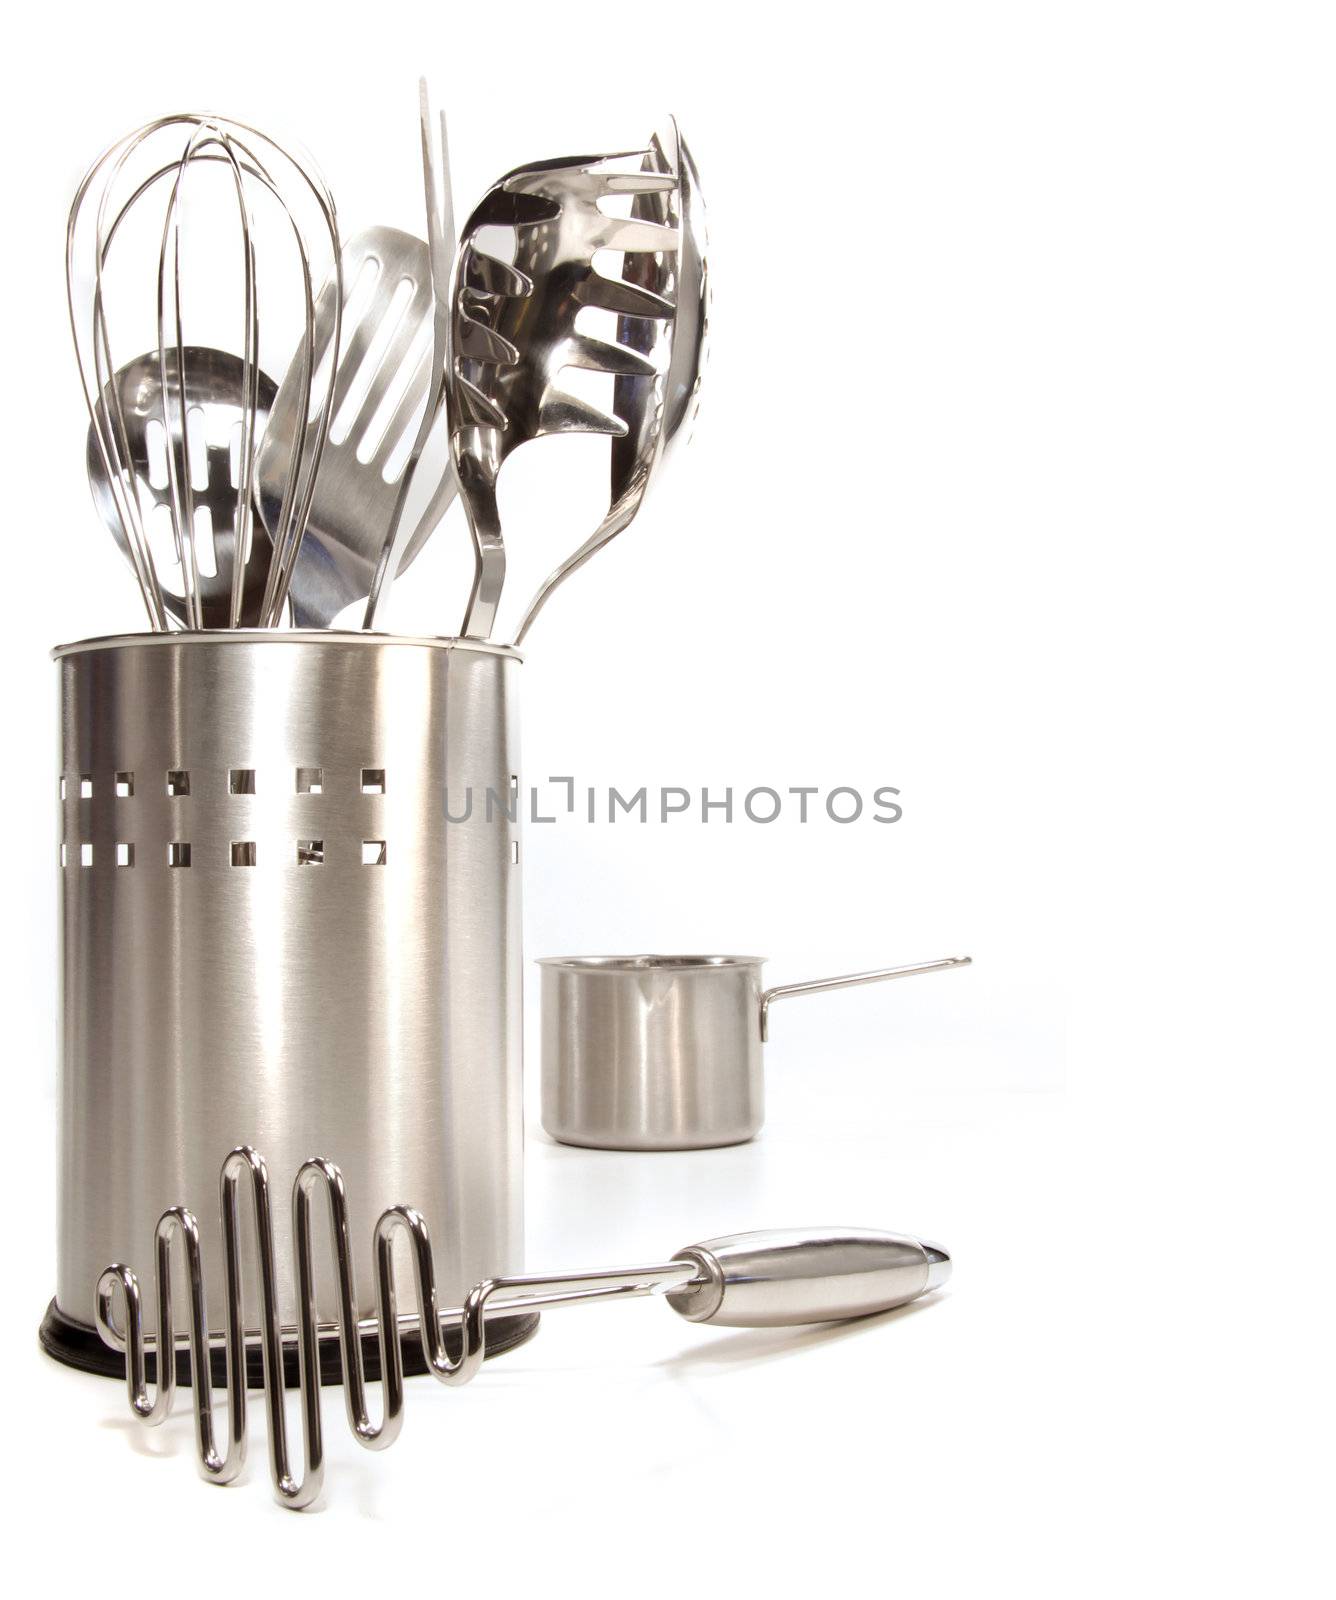 Variety of stainless utensils on white background